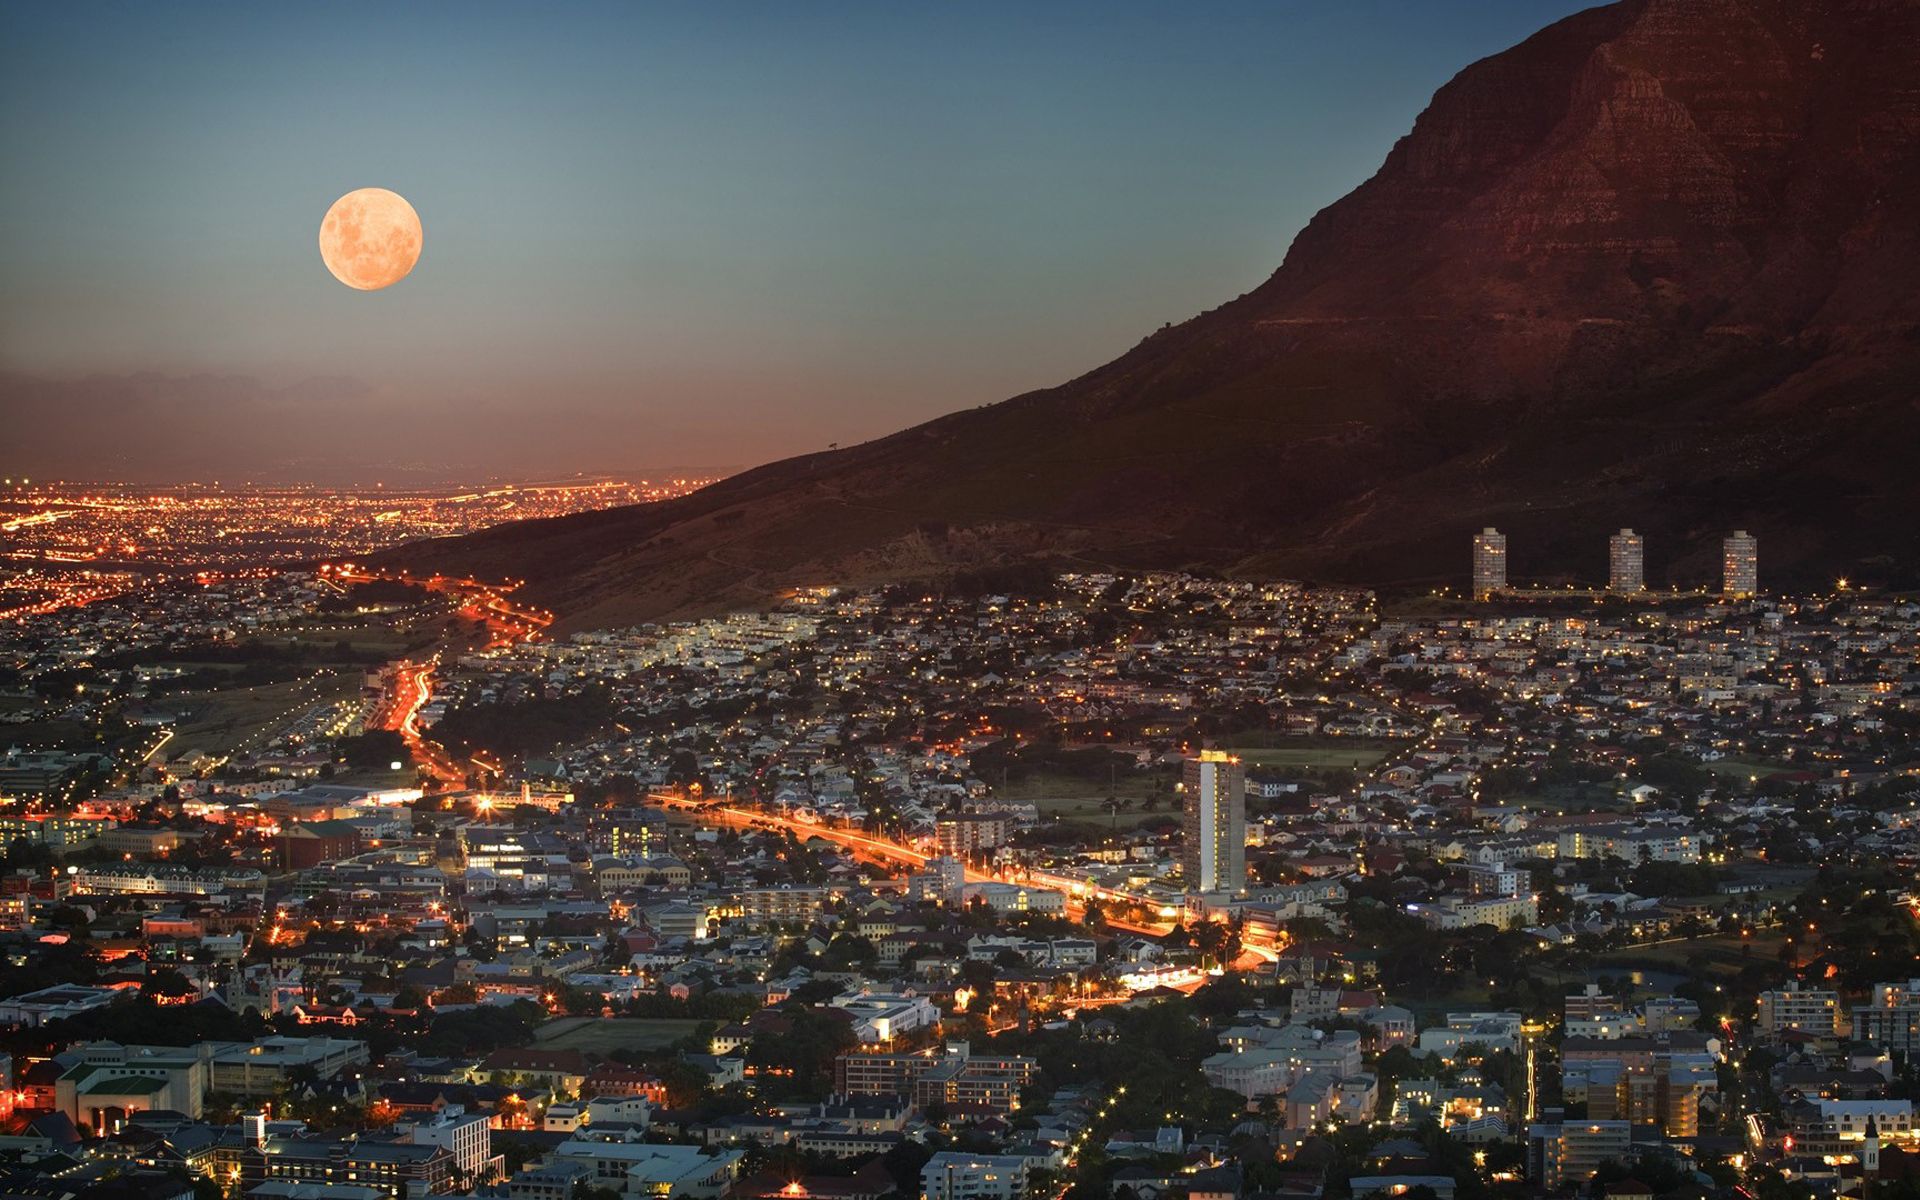 Wallpaper Full HD megalopolis, cities, houses, sky, twilight, moon, lights, mountain, shine, light, skyscrapers, dusk, height, megapolis, view, panorama, cape town, south africa